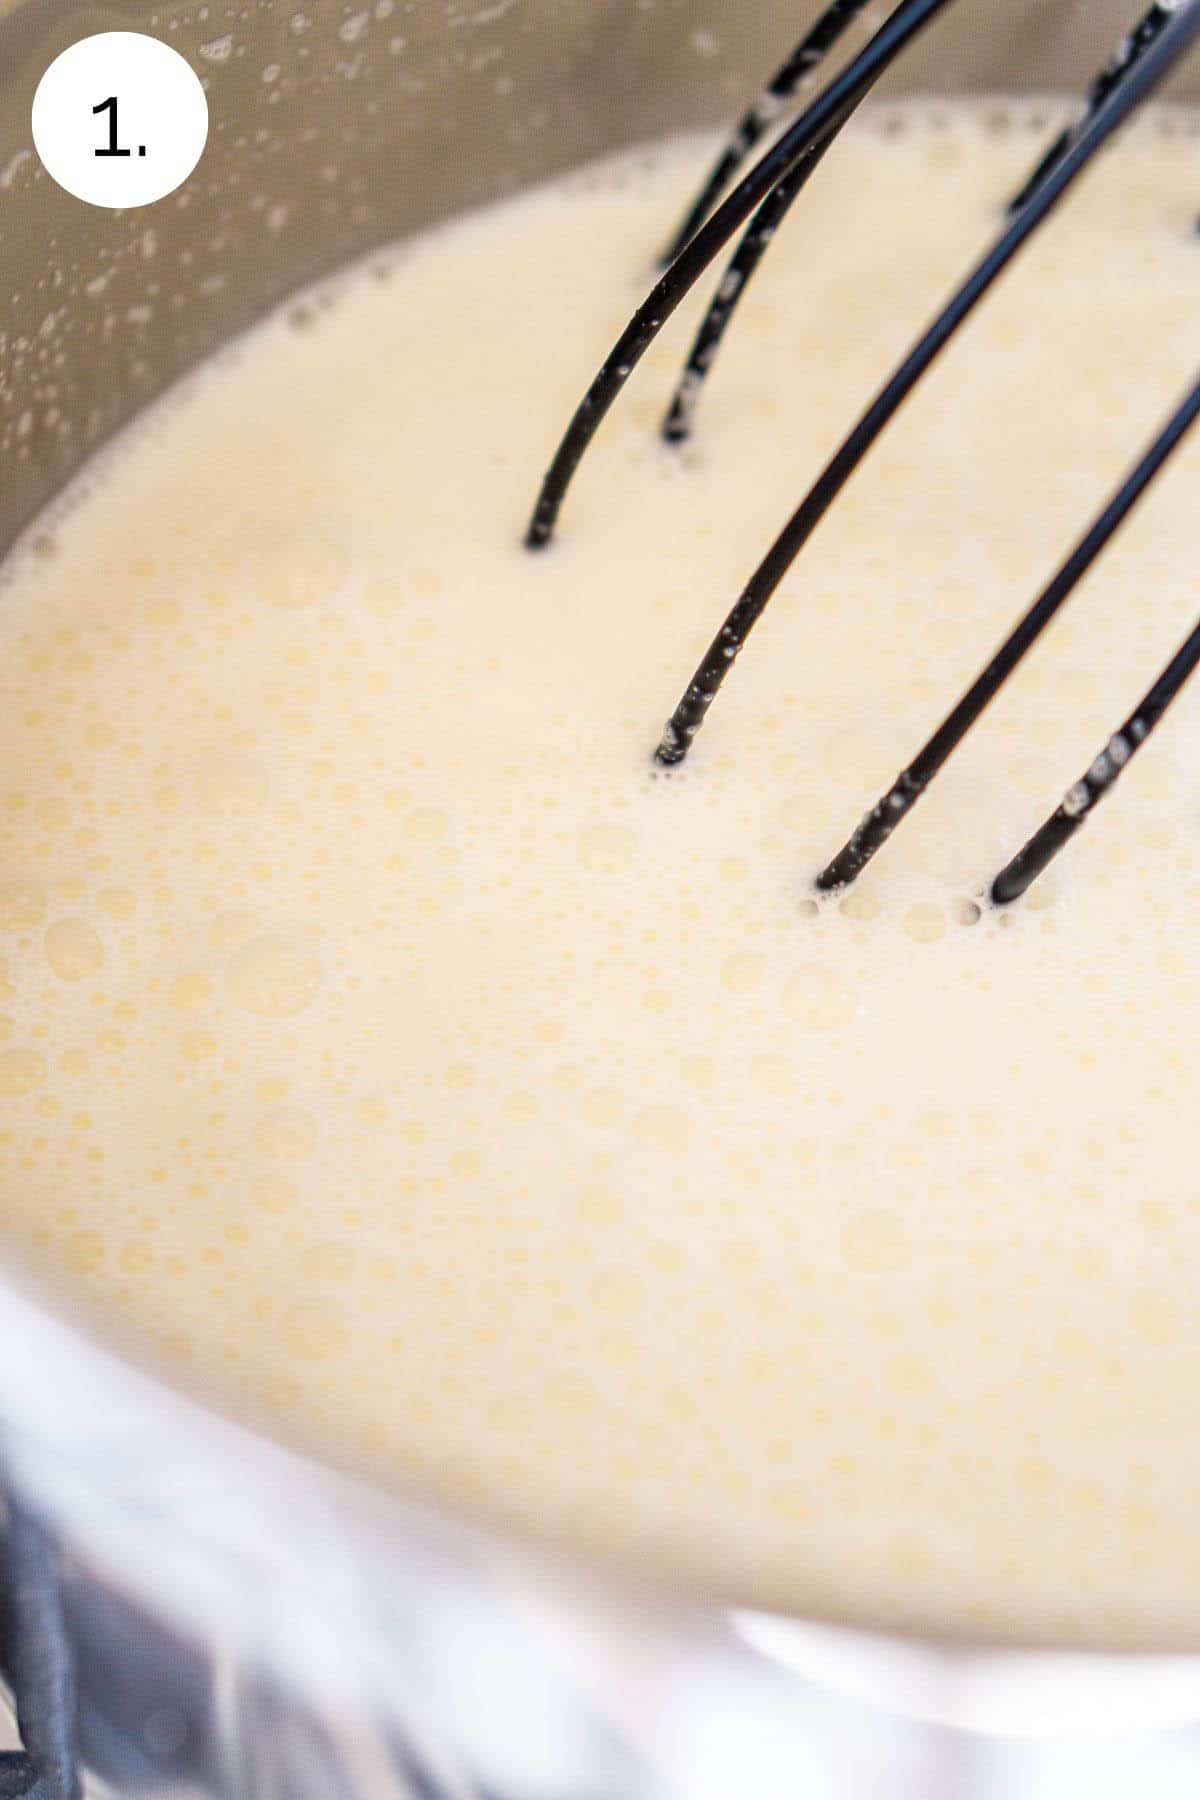 A black whisking mixing the cream, milk and sugar in a small stainless steel saucepan as it simmers on the stove.